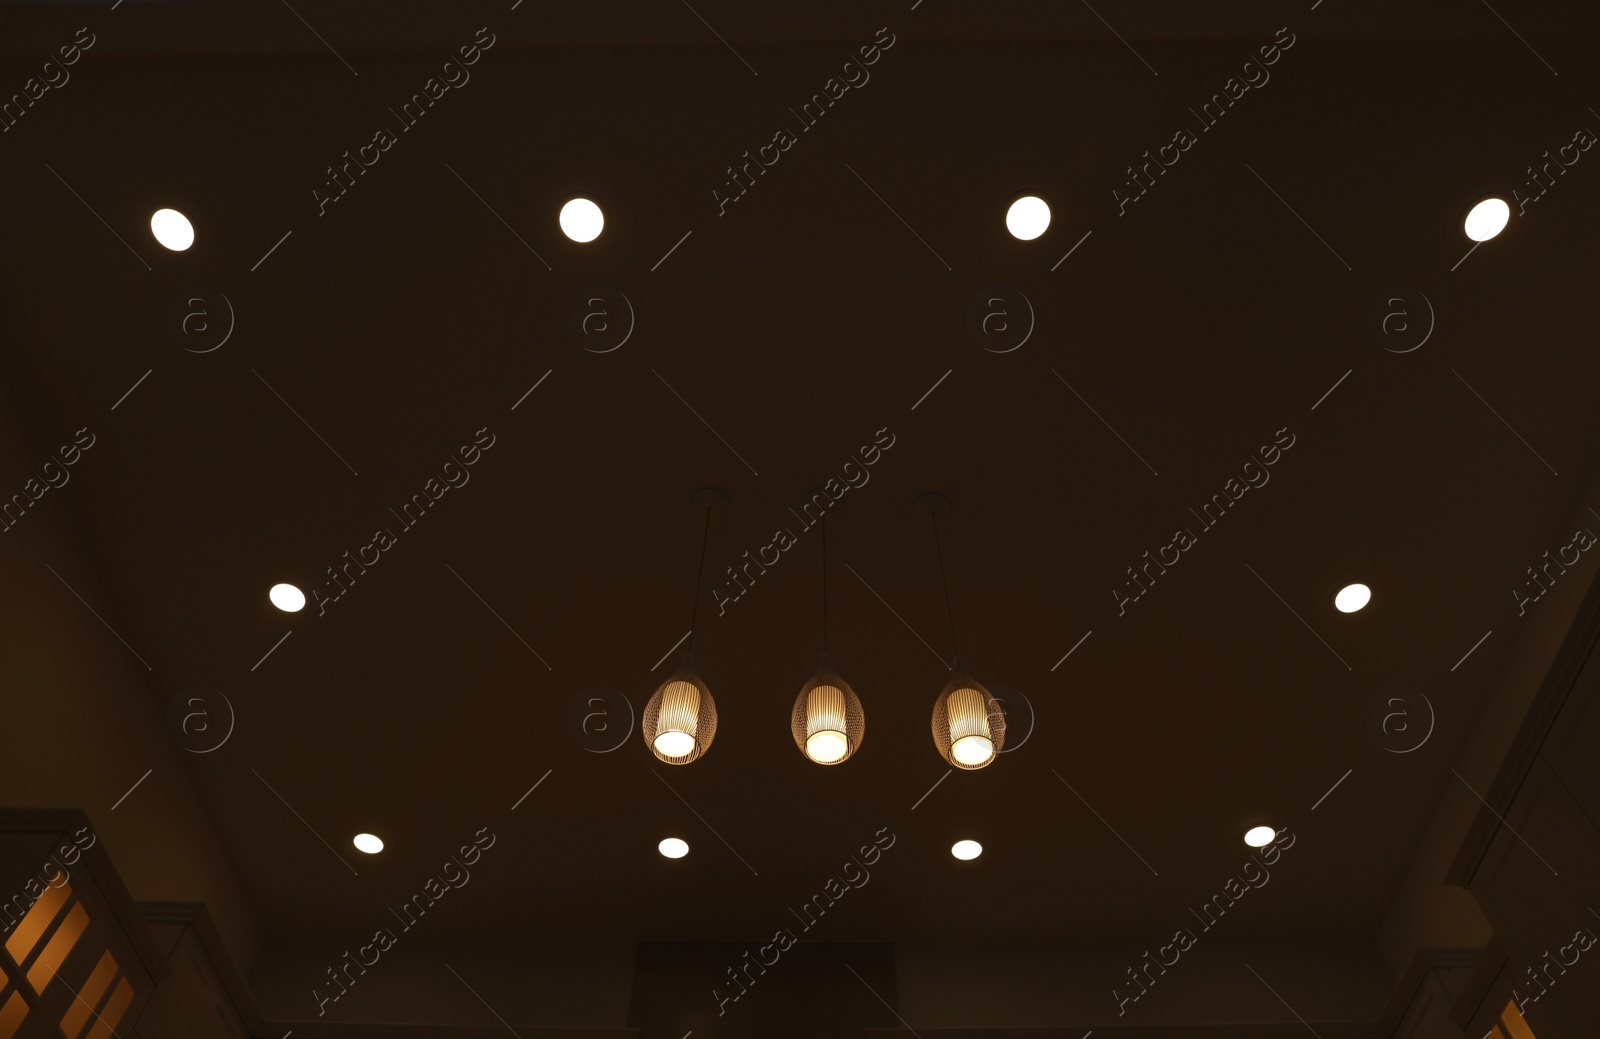 Photo of Ceiling with modern lamps in stylish room at night, low angle view